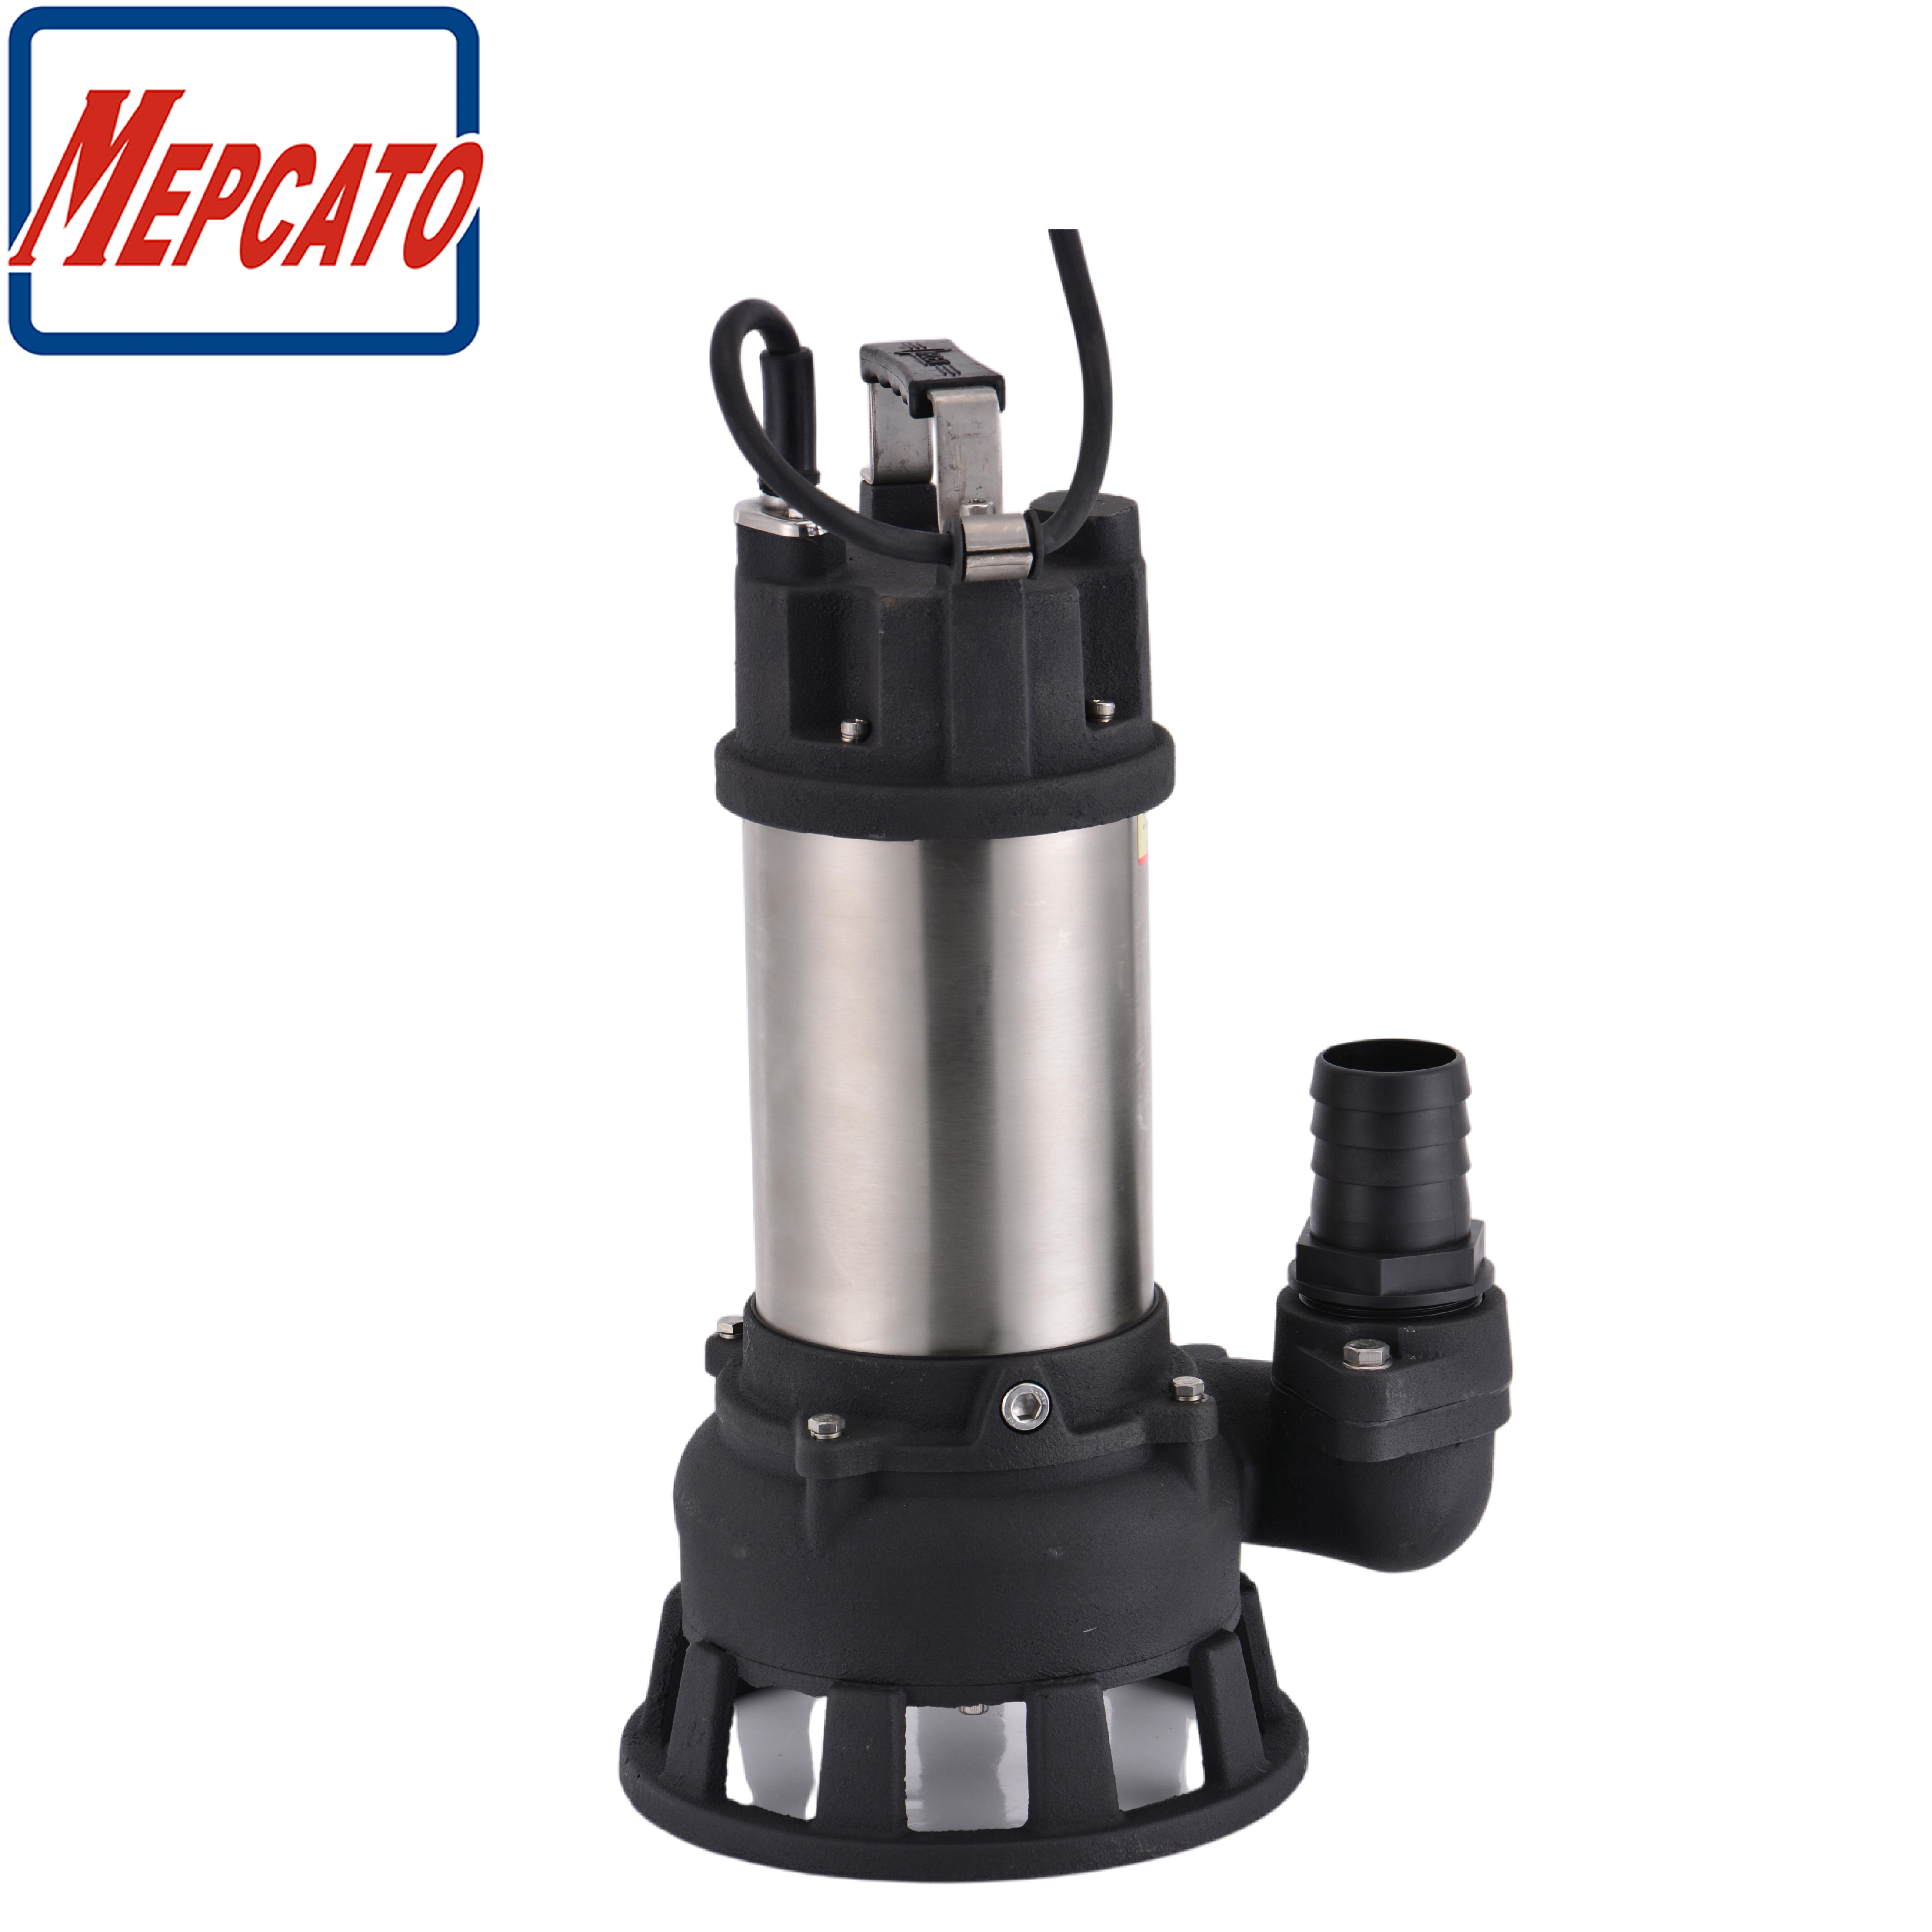 Large Flow Cast Iron Electric Submersible Waste Water Drainage Dewatering Pump with Cutter for Factory Plants Industrial Construction Sites